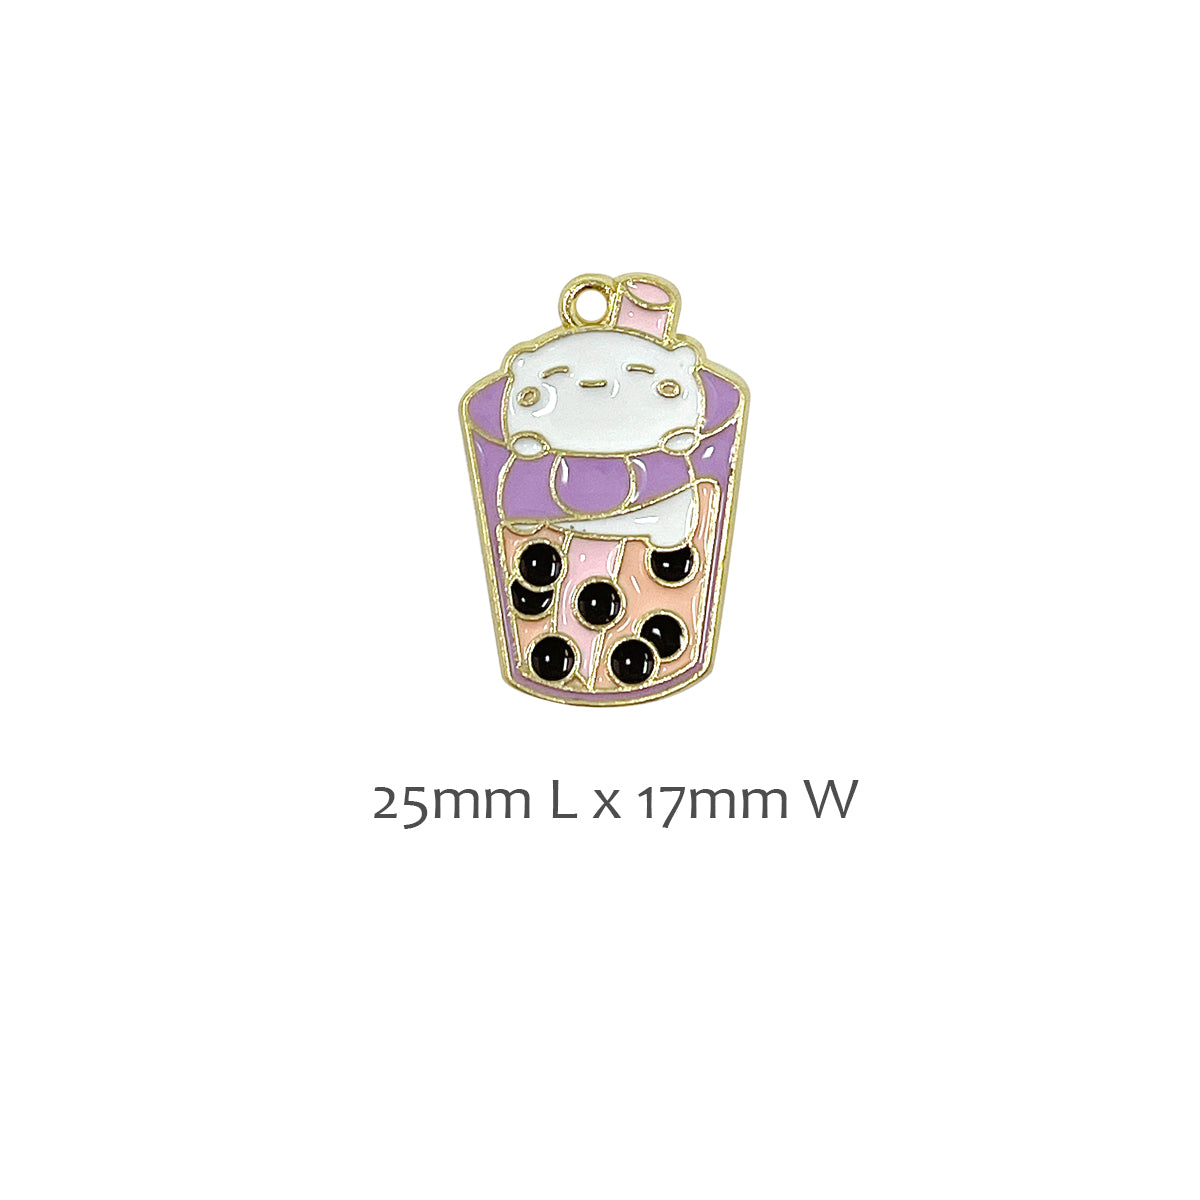 Wrapables Boba Milk Tea Pendant Charms for Jewelry Making (Set of 10)